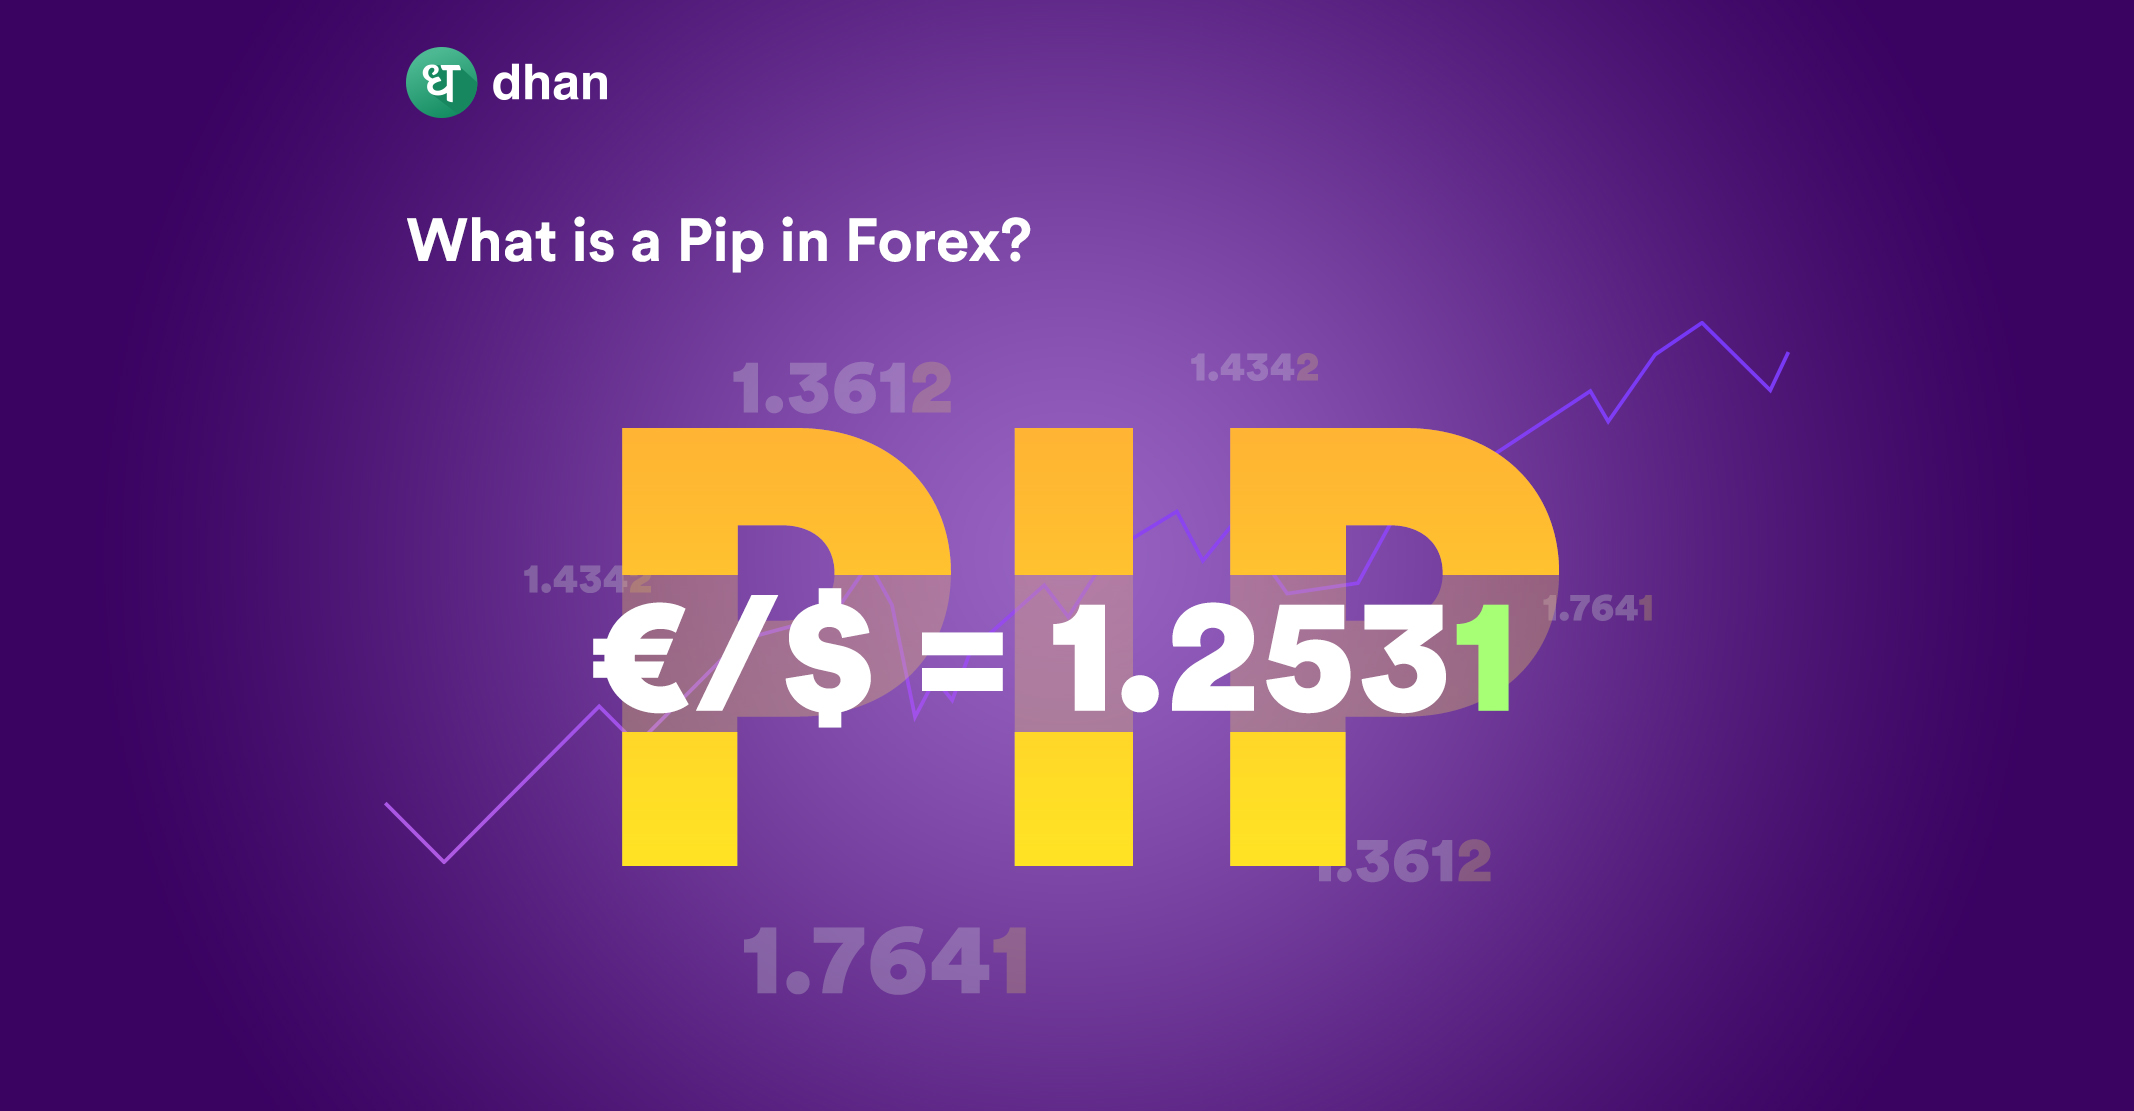 What a Pip in Forex Means